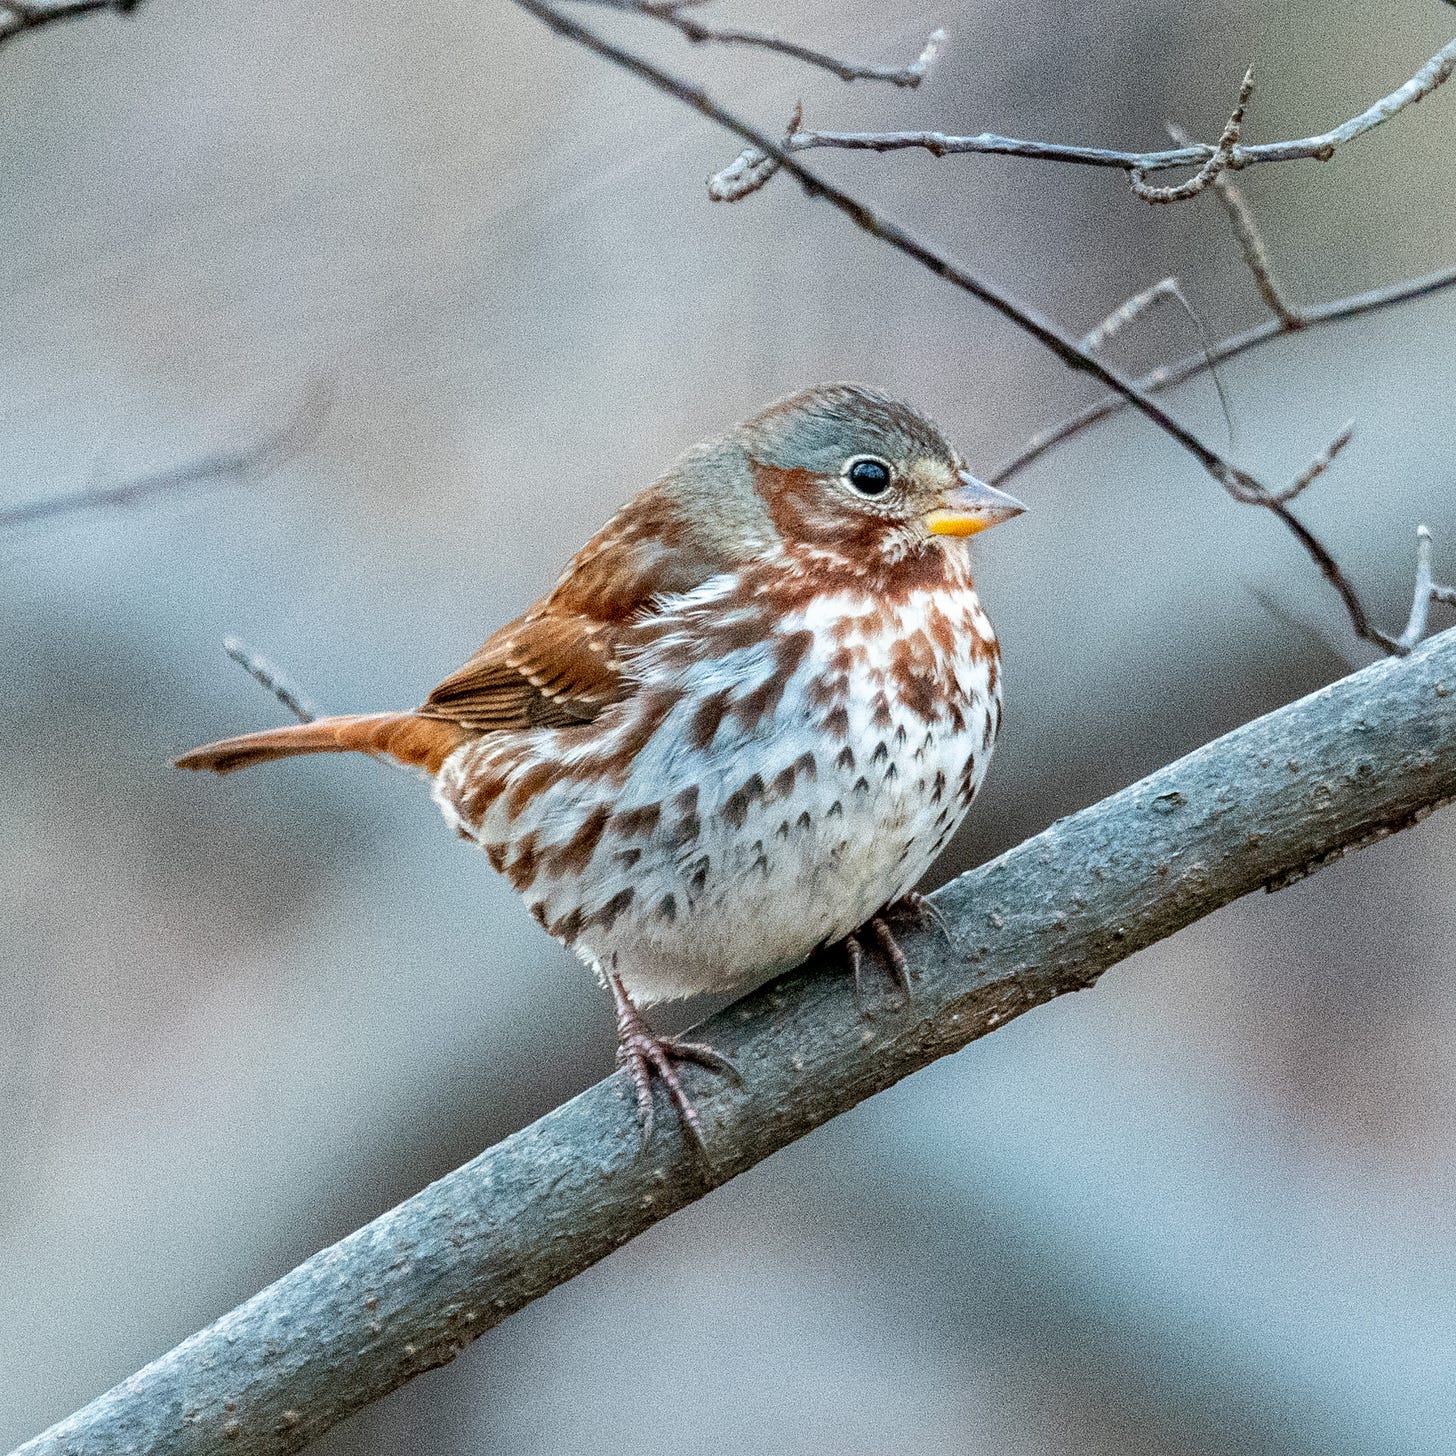 Chubby fox sparrow in profile, in warm light